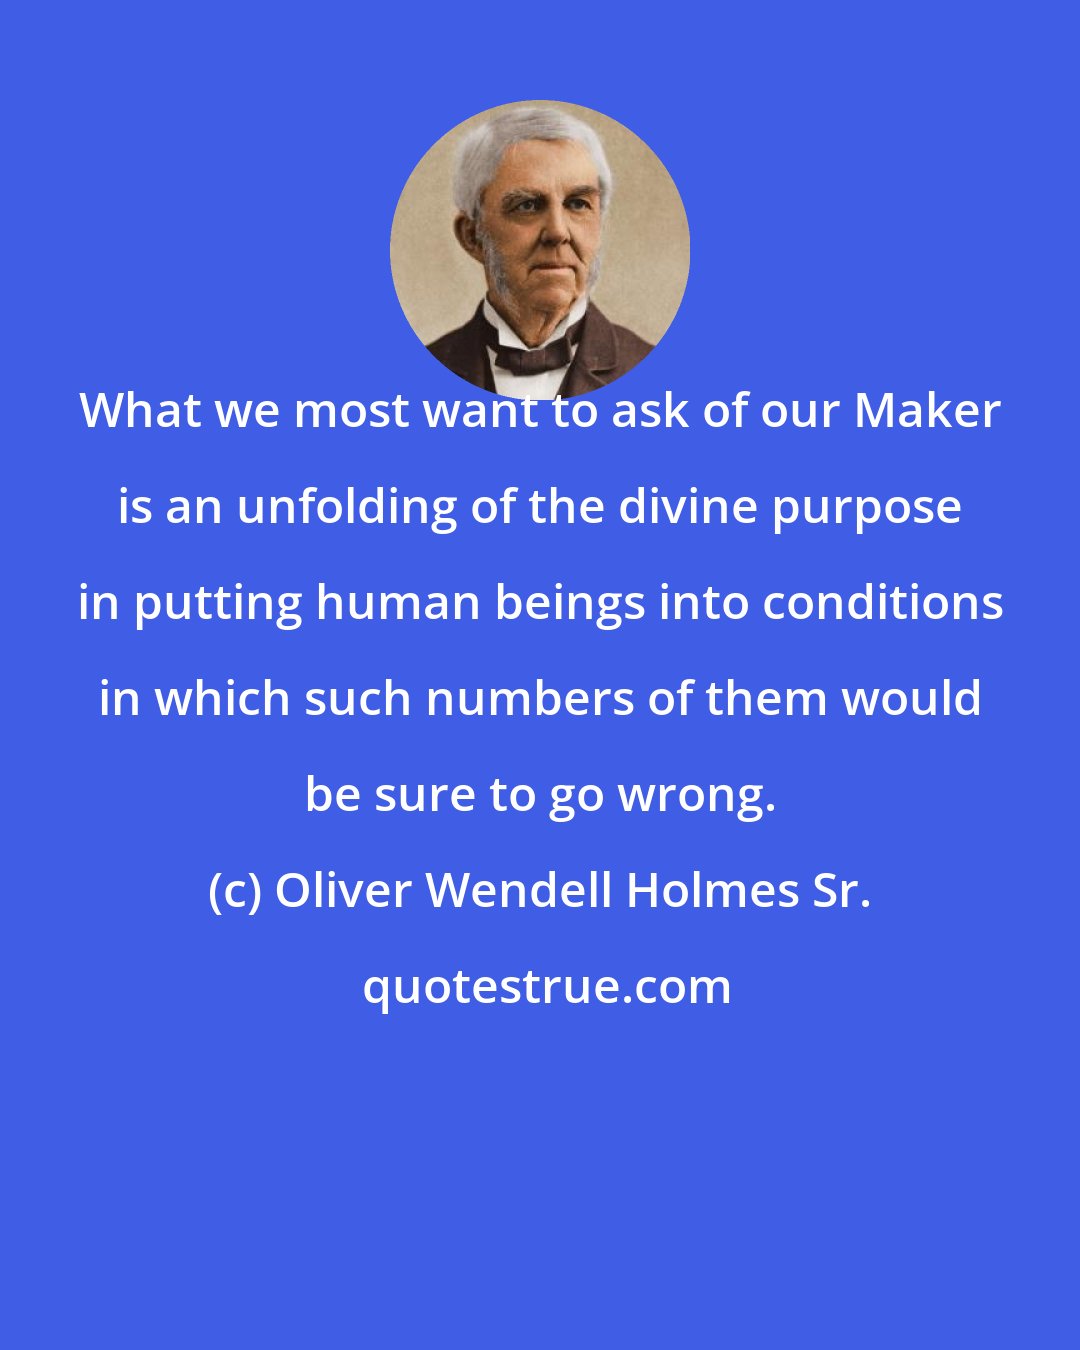 Oliver Wendell Holmes Sr.: What we most want to ask of our Maker is an unfolding of the divine purpose in putting human beings into conditions in which such numbers of them would be sure to go wrong.